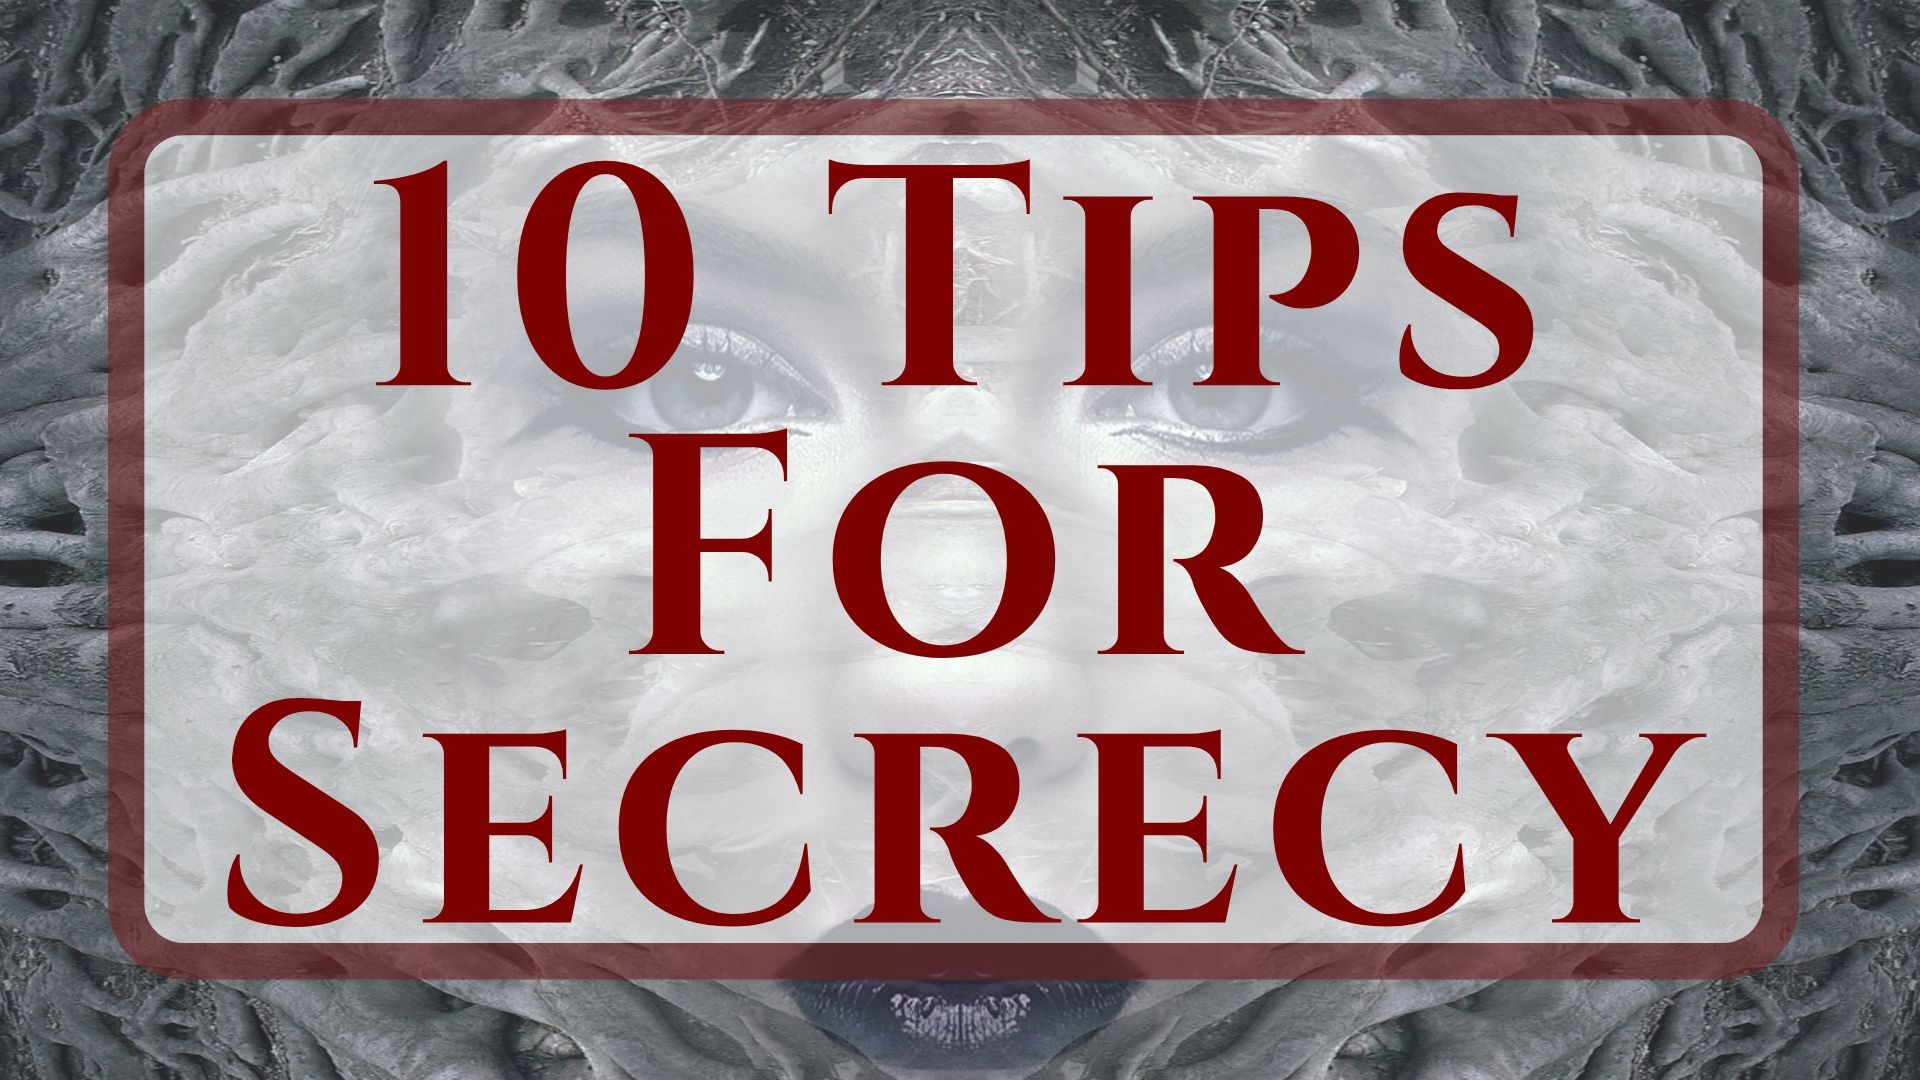 10 tips for secrecy